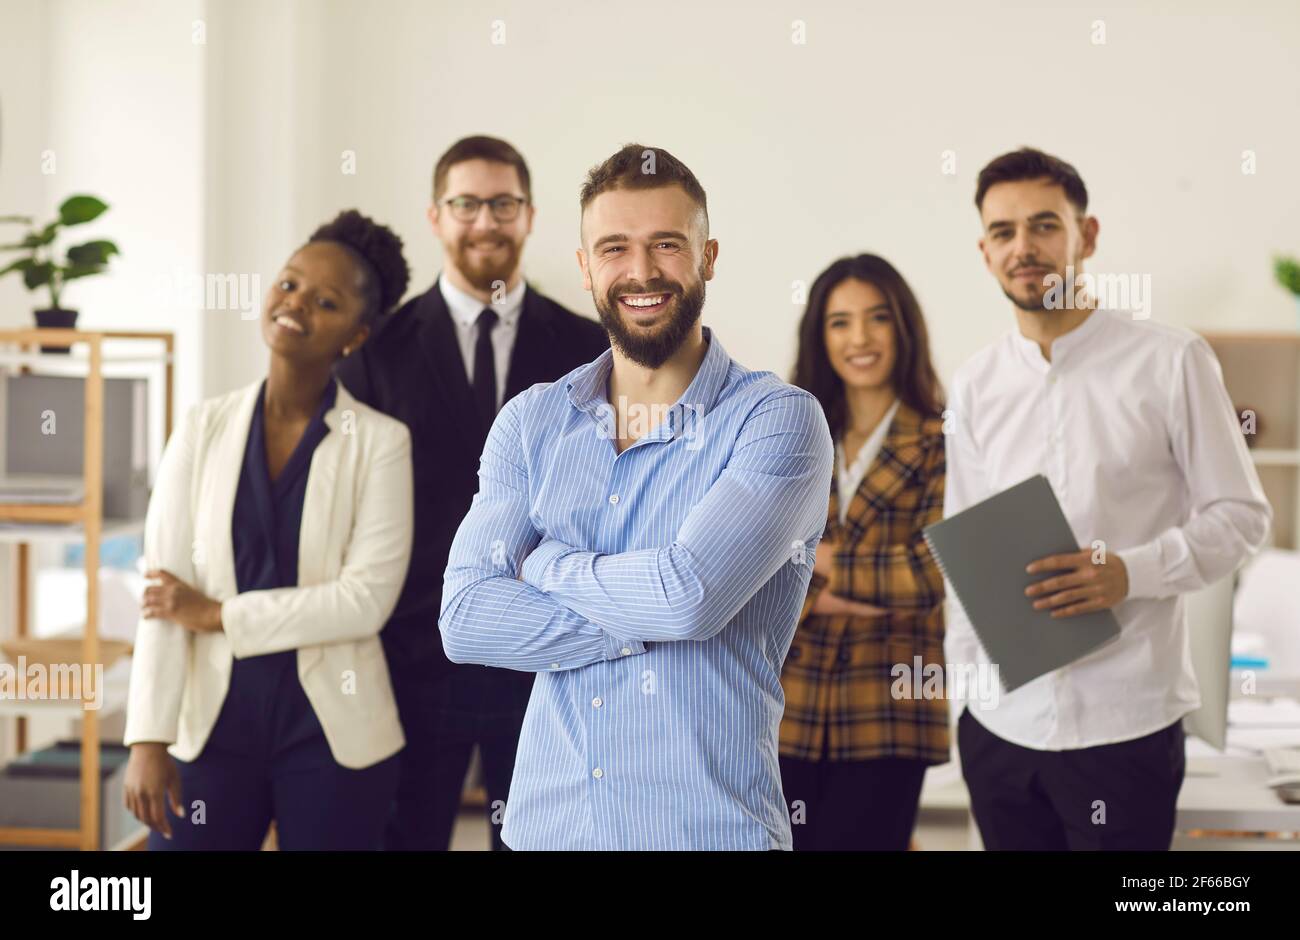 Happy smiling handsome caucasian manager or team leader standing with employees Stock Photo